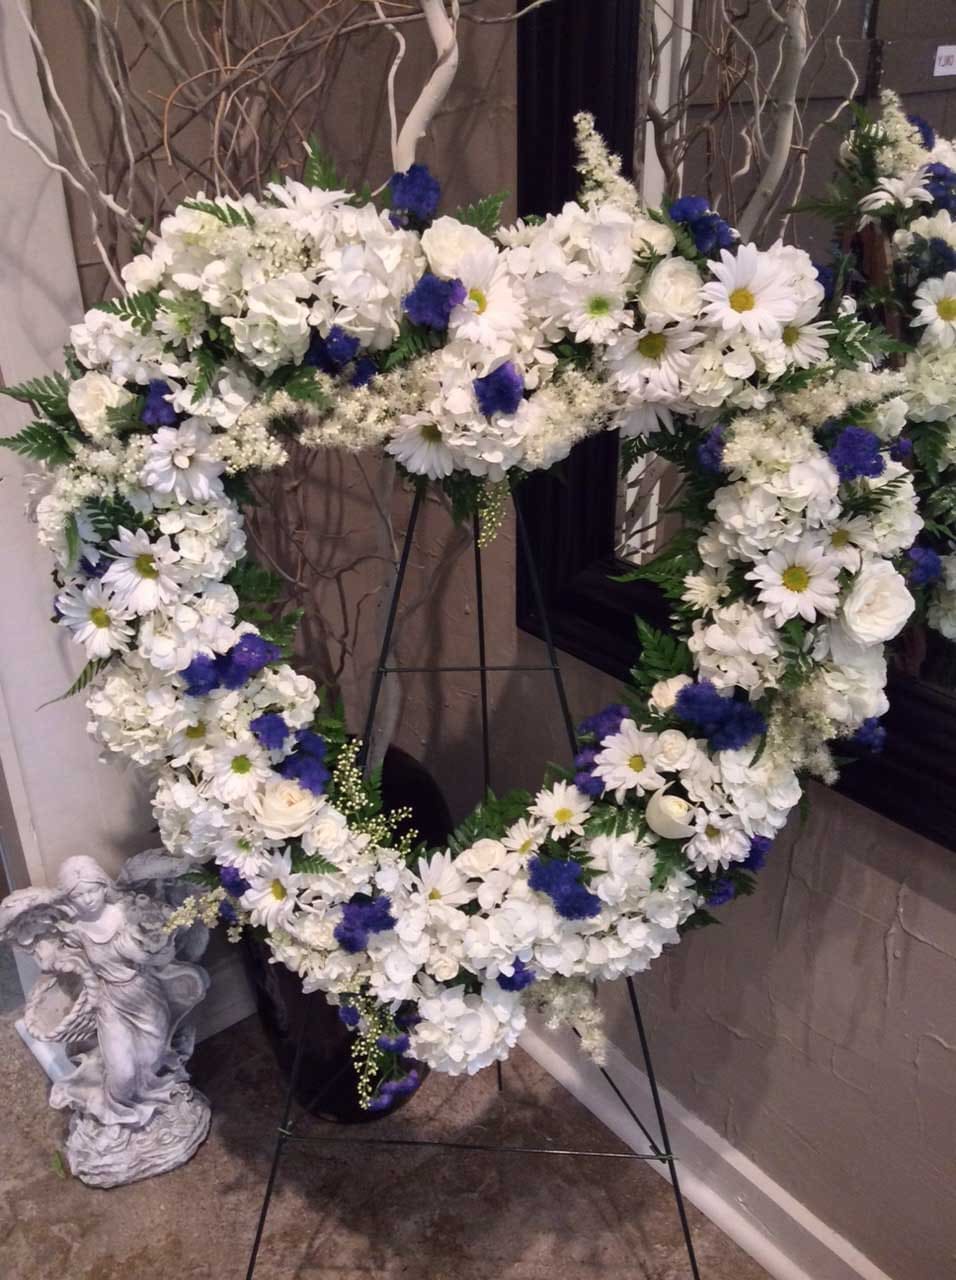 Missing You Large Standing Heart  - This delicate heart-shaped wreath is made with a lovingly handpicked selection of blue, cream, and white flowers. Perfect for a memorial service, this wreath evokes a sense of peace and remembrance with its intricate design. The combination of flowers create a serene and calming feel, allowing the memory of your loved one to be celebrated in a meaningful way.